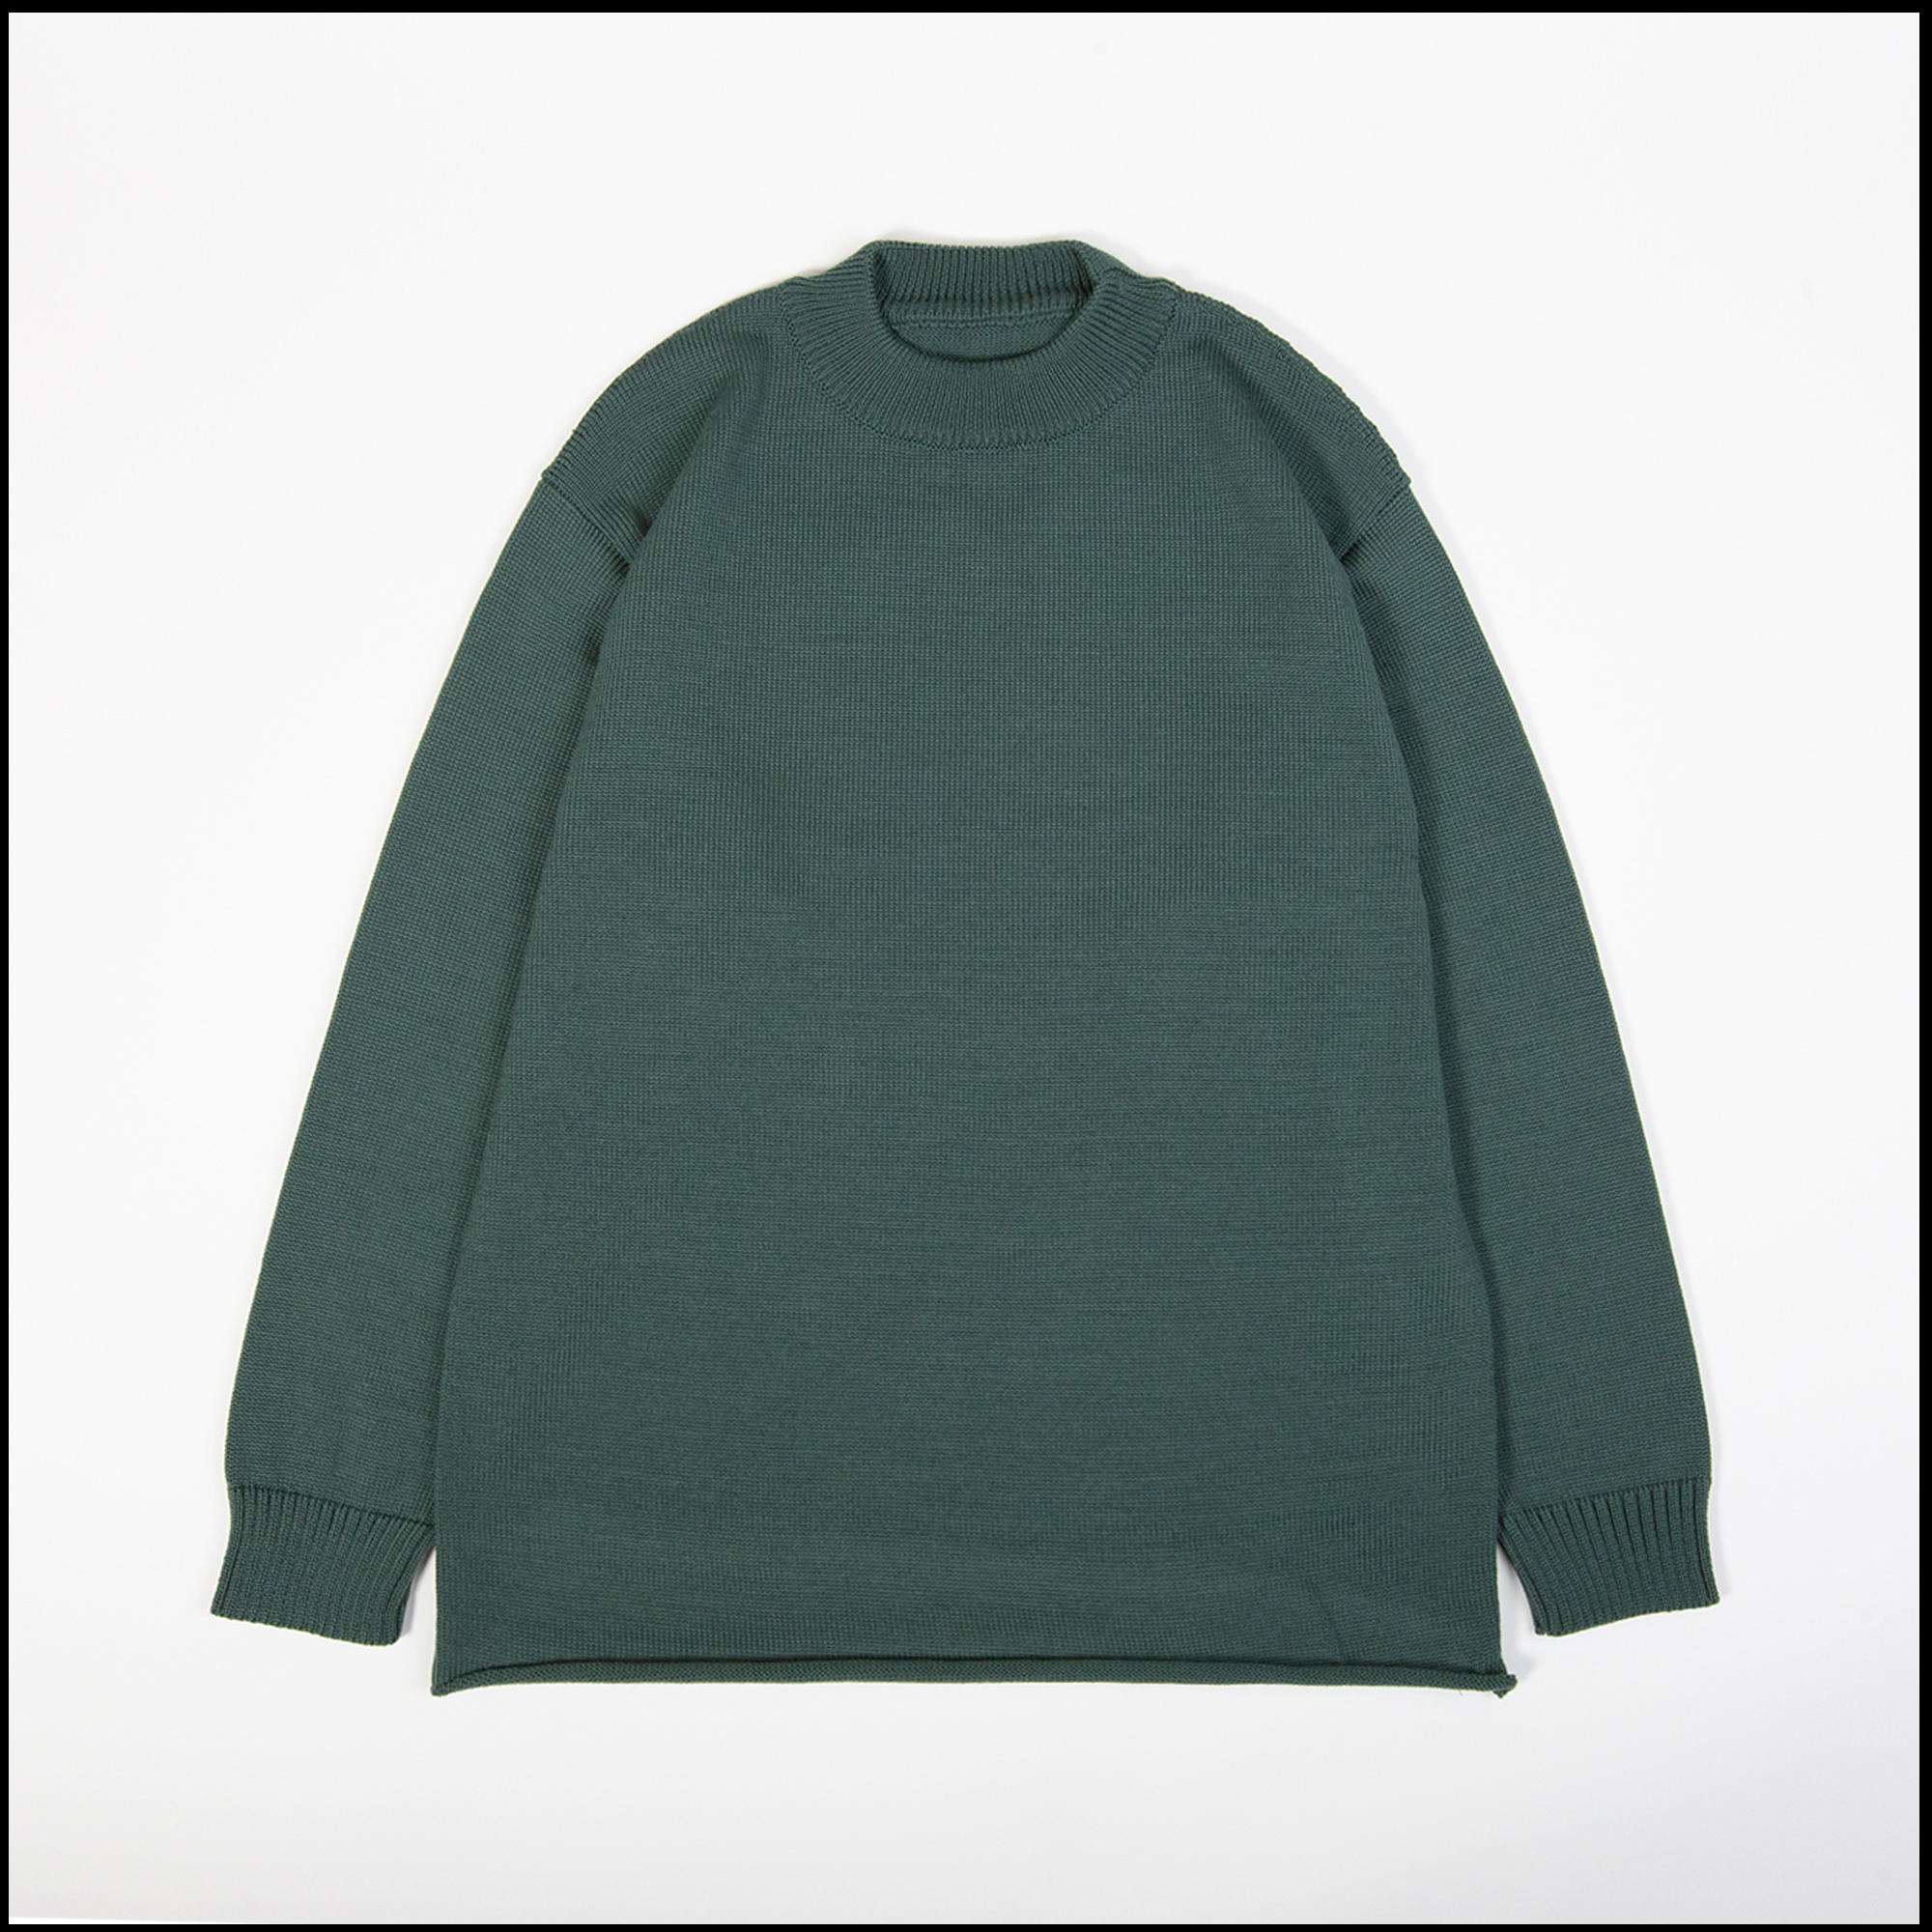 DYCE sweater in Emerald color by Arpenteur